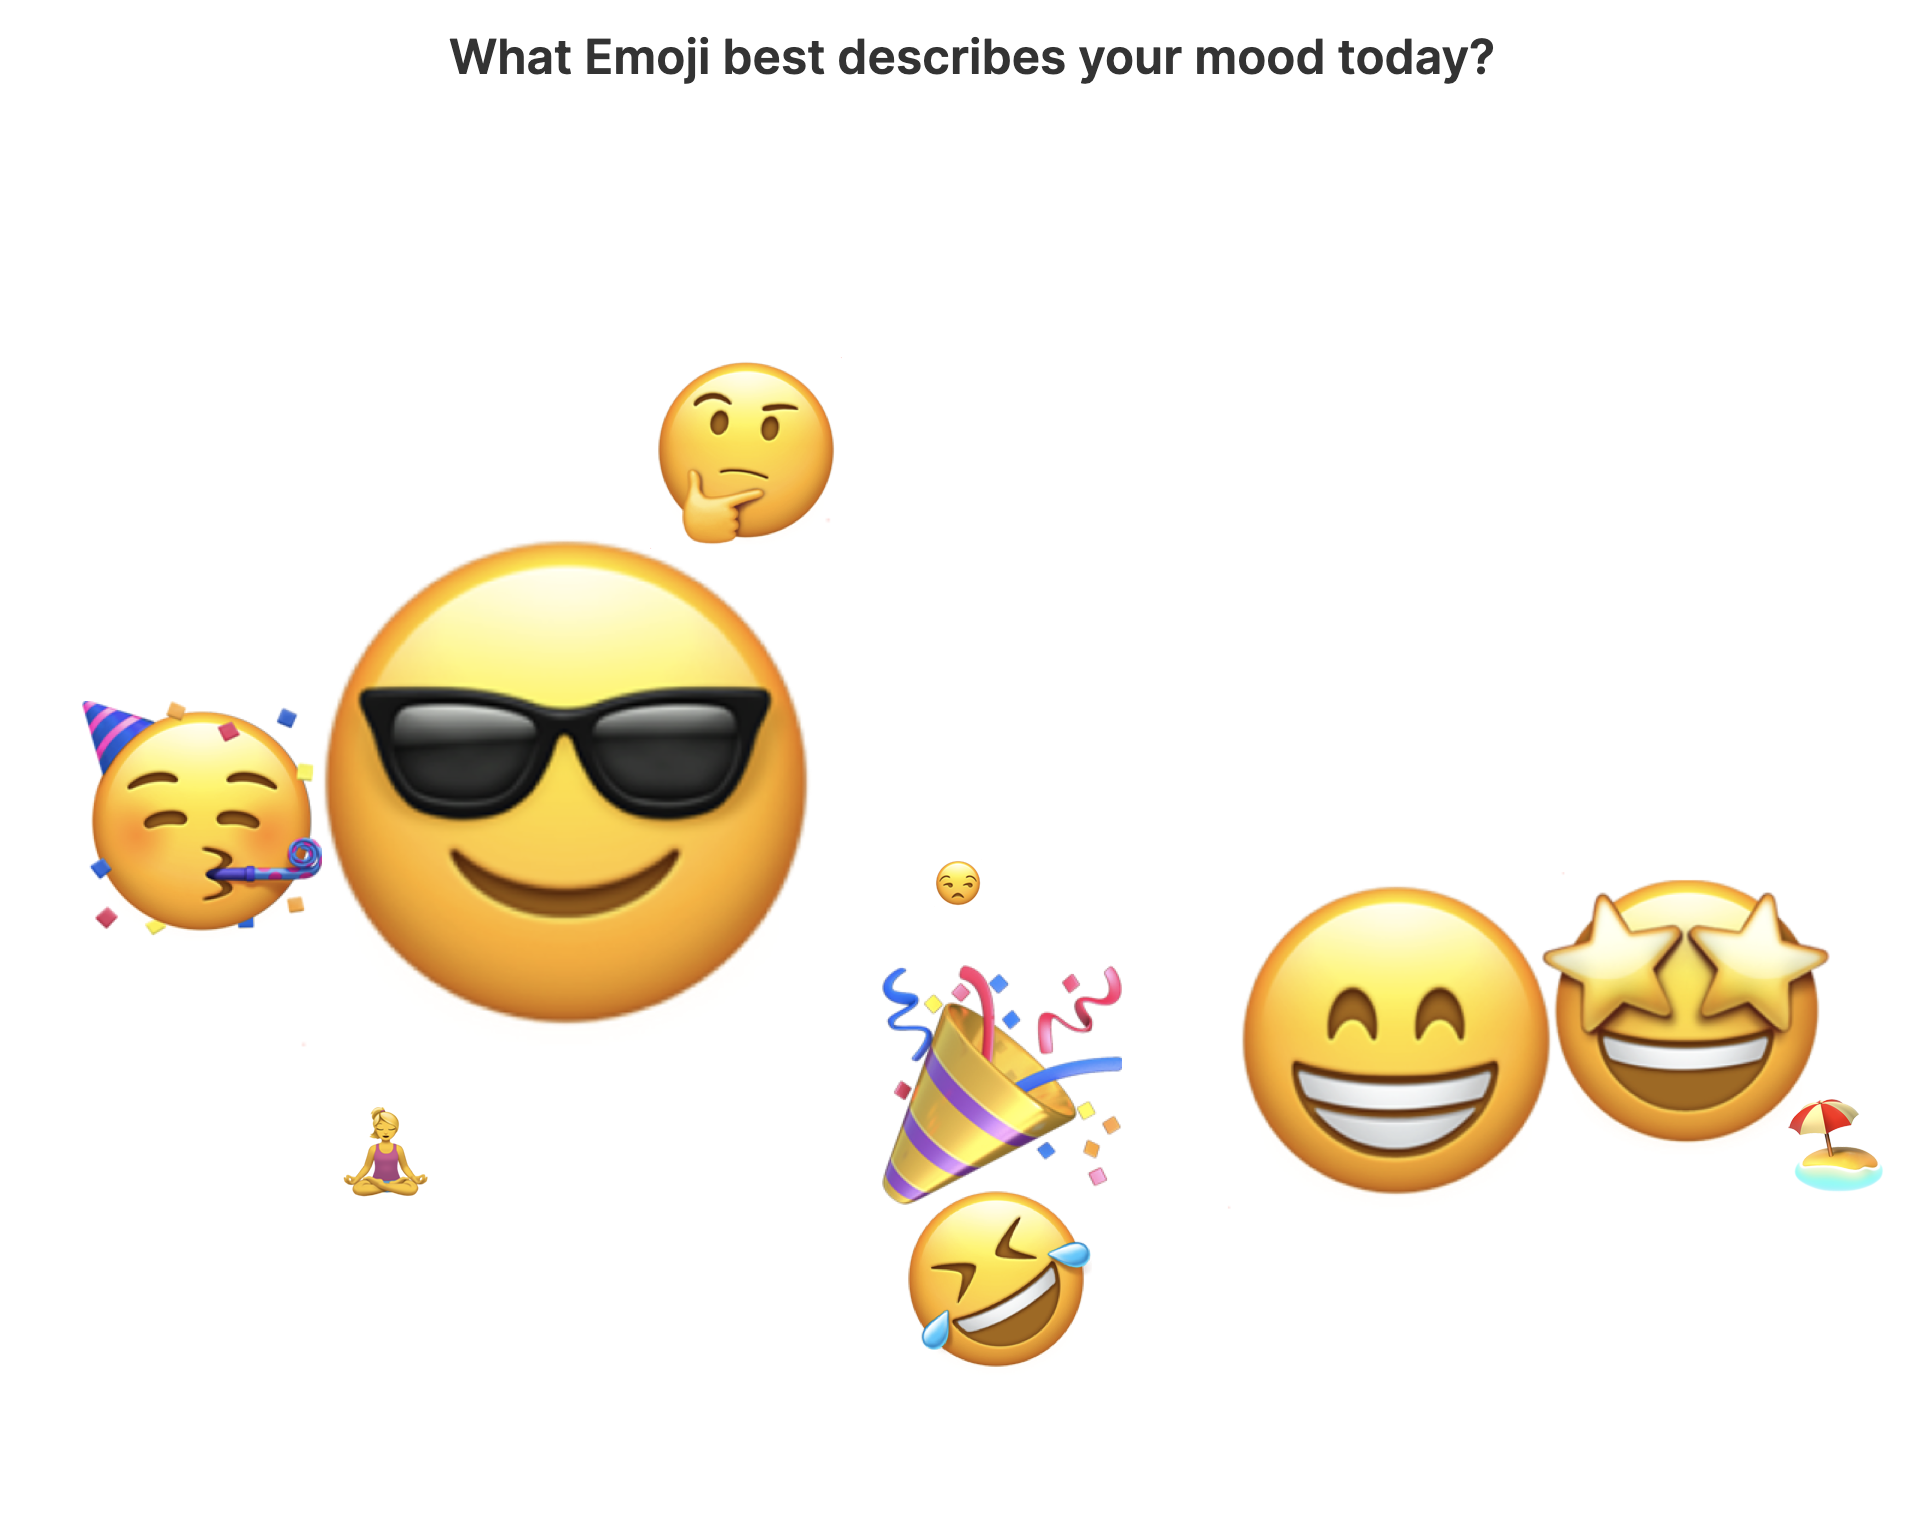 Emojis on a white background in a Word Cloud fashion